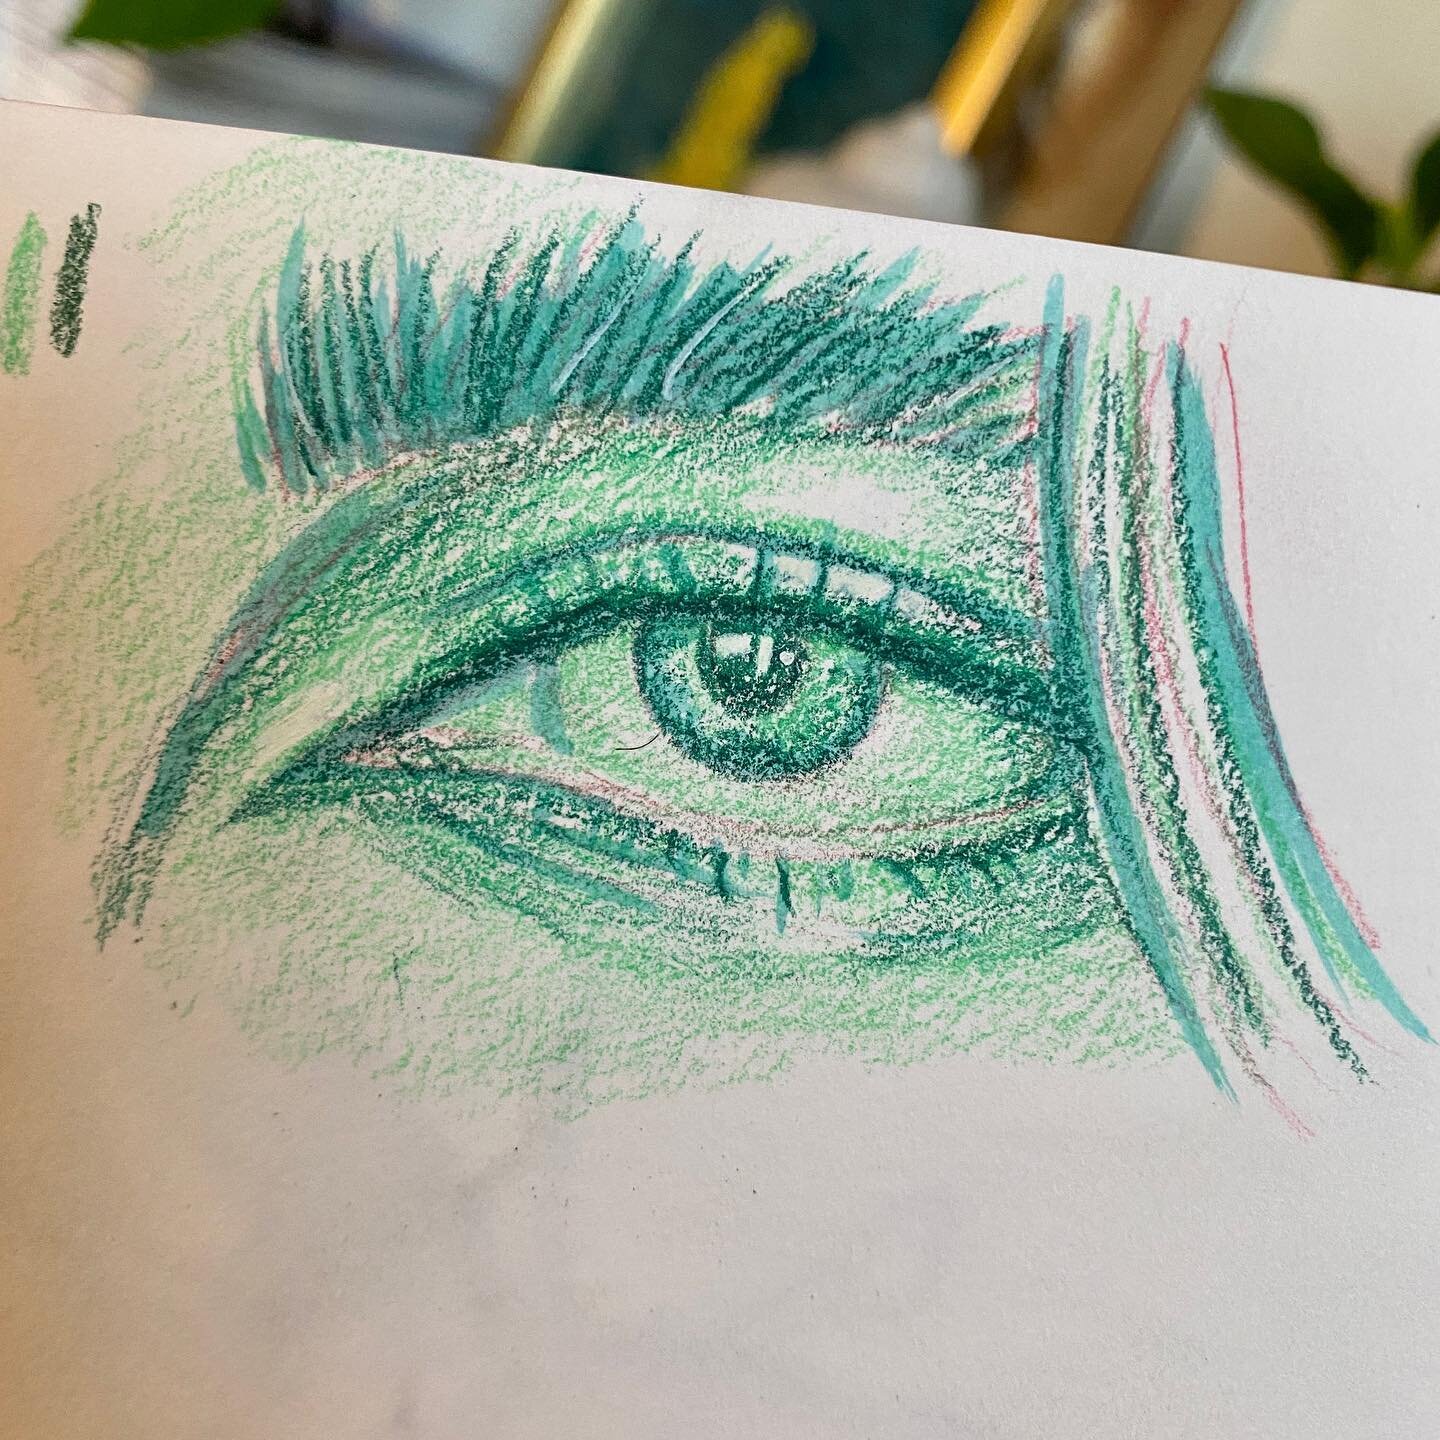 22/365 eye studies in the sketchbook when I don&rsquo;t have any other inspiration 🤷🏻&zwj;♀️ I actually really liked working with a monochromatic palette so you might see more of these! I&rsquo;m also SO close to finishing my sketchbook and these l